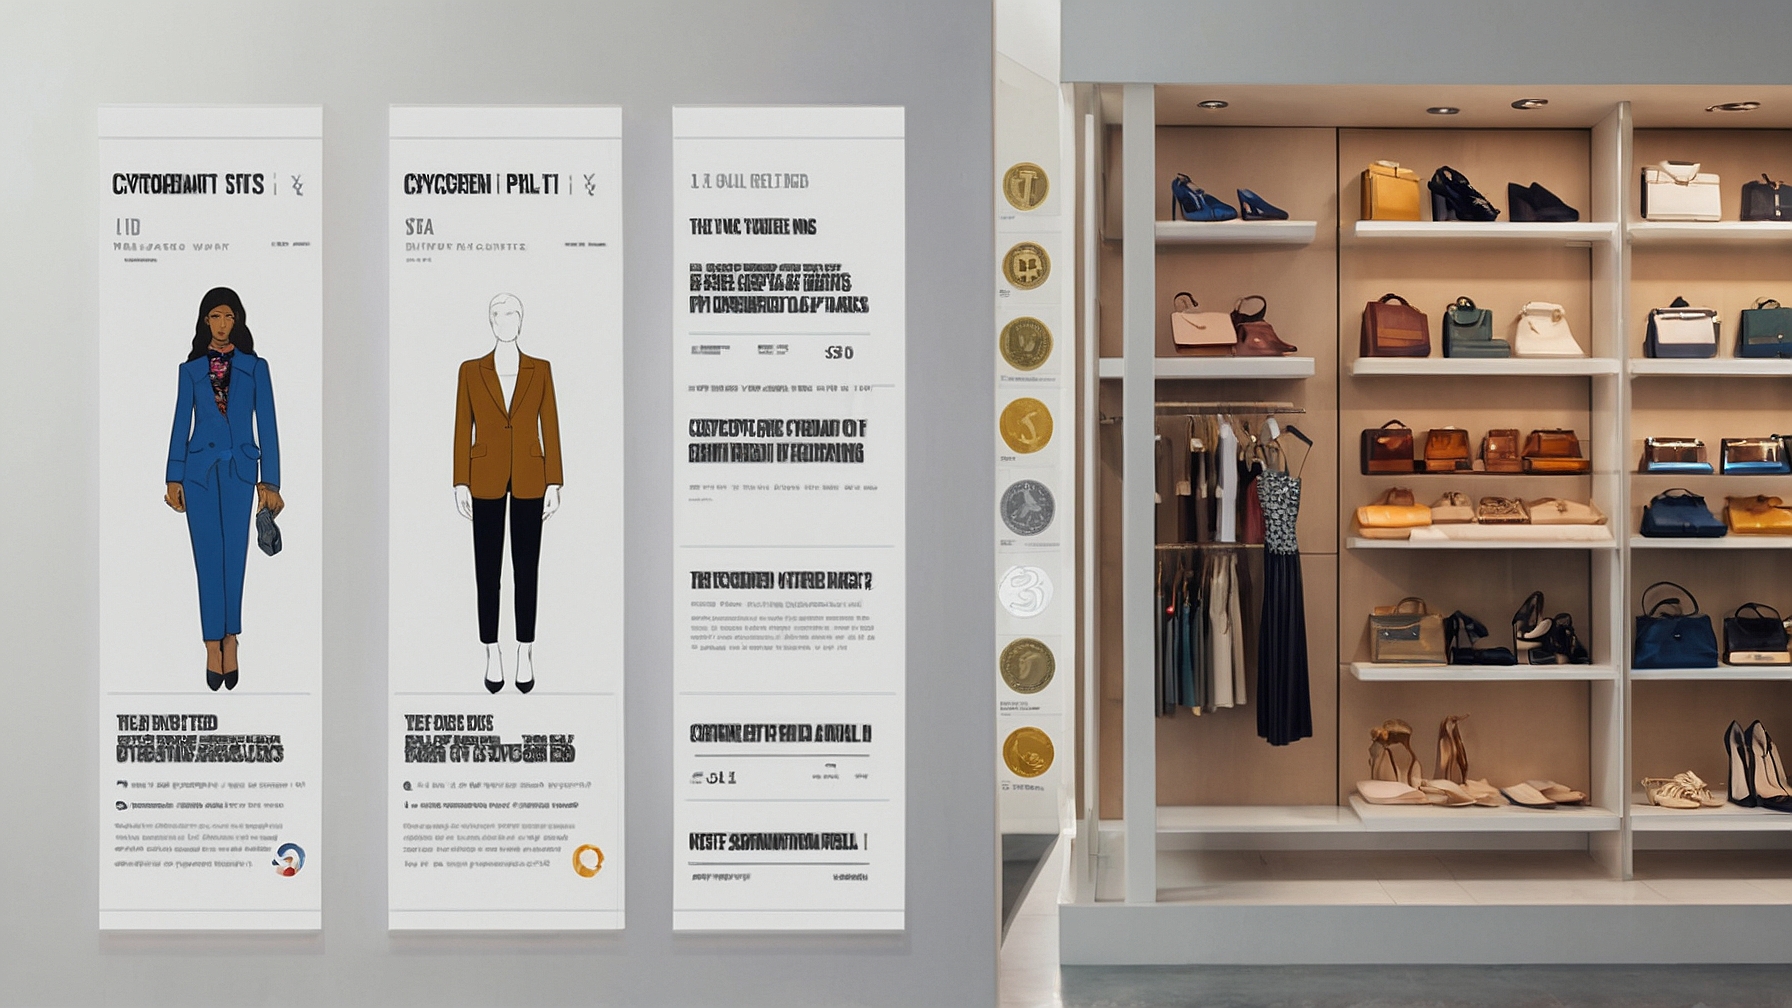 A sleek infographic poster illustrating the seamless integration of cryptocurrency into fashion retail, with simple icons depicting the purchasing process of art-inspired clothing.